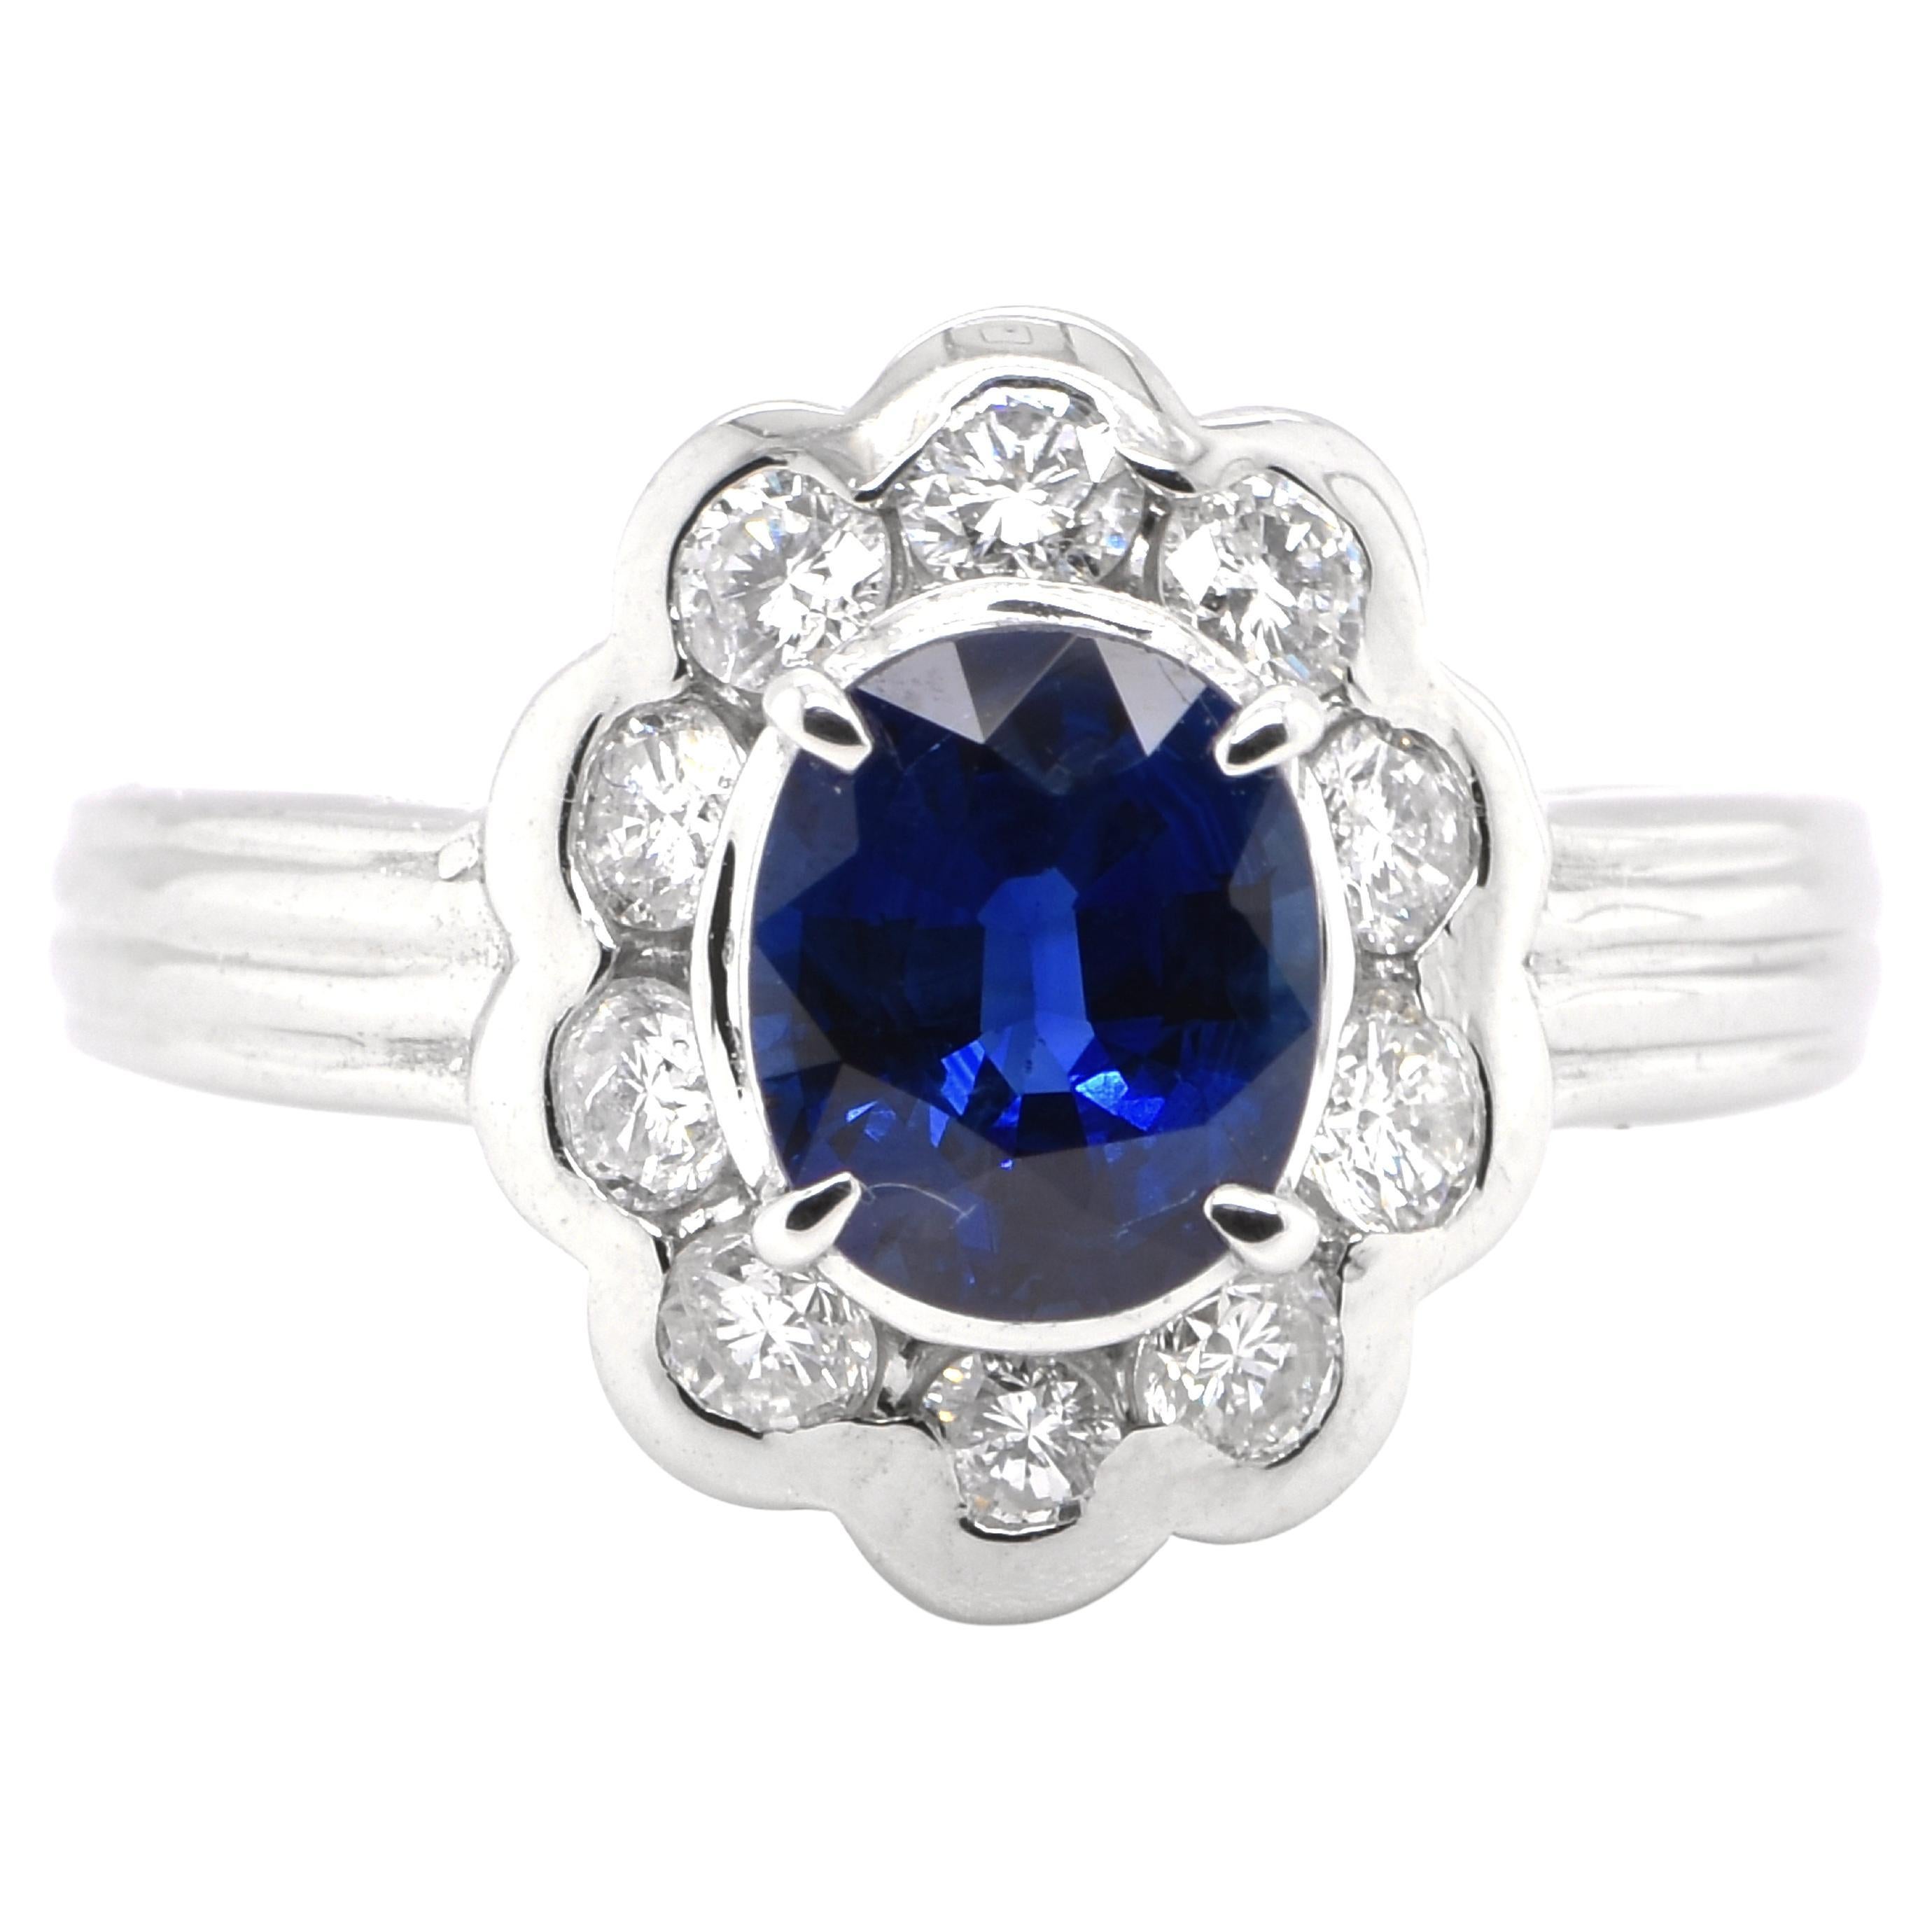 1.18 Carat Natural Sapphire and Diamond Antique Ring Set in Platinum For Sale